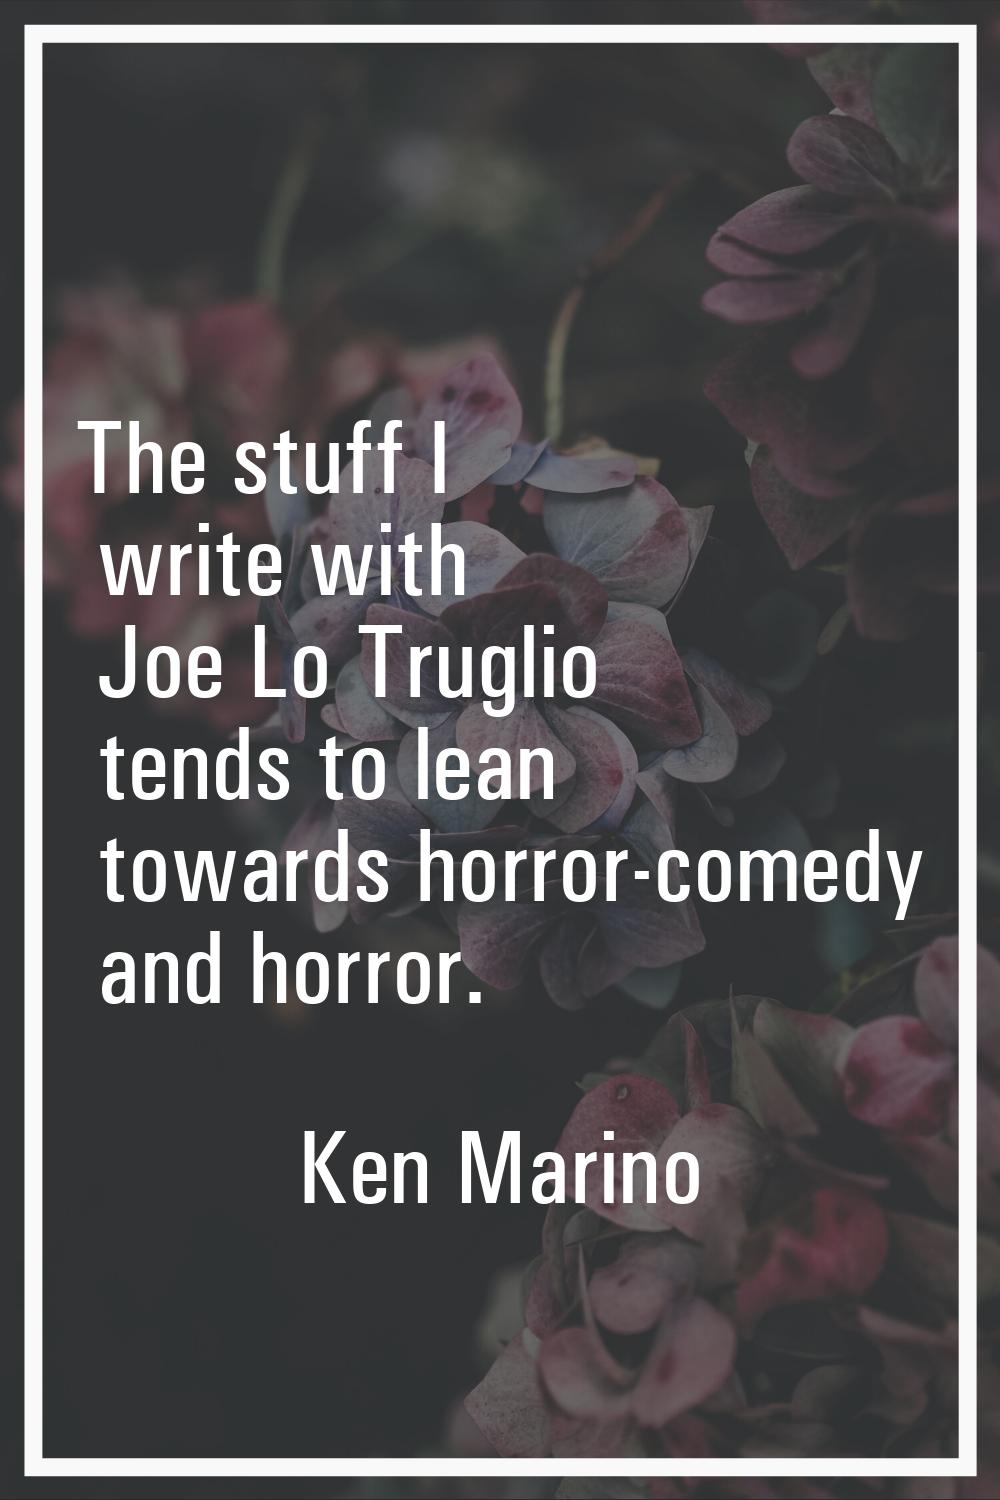 The stuff I write with Joe Lo Truglio tends to lean towards horror-comedy and horror.